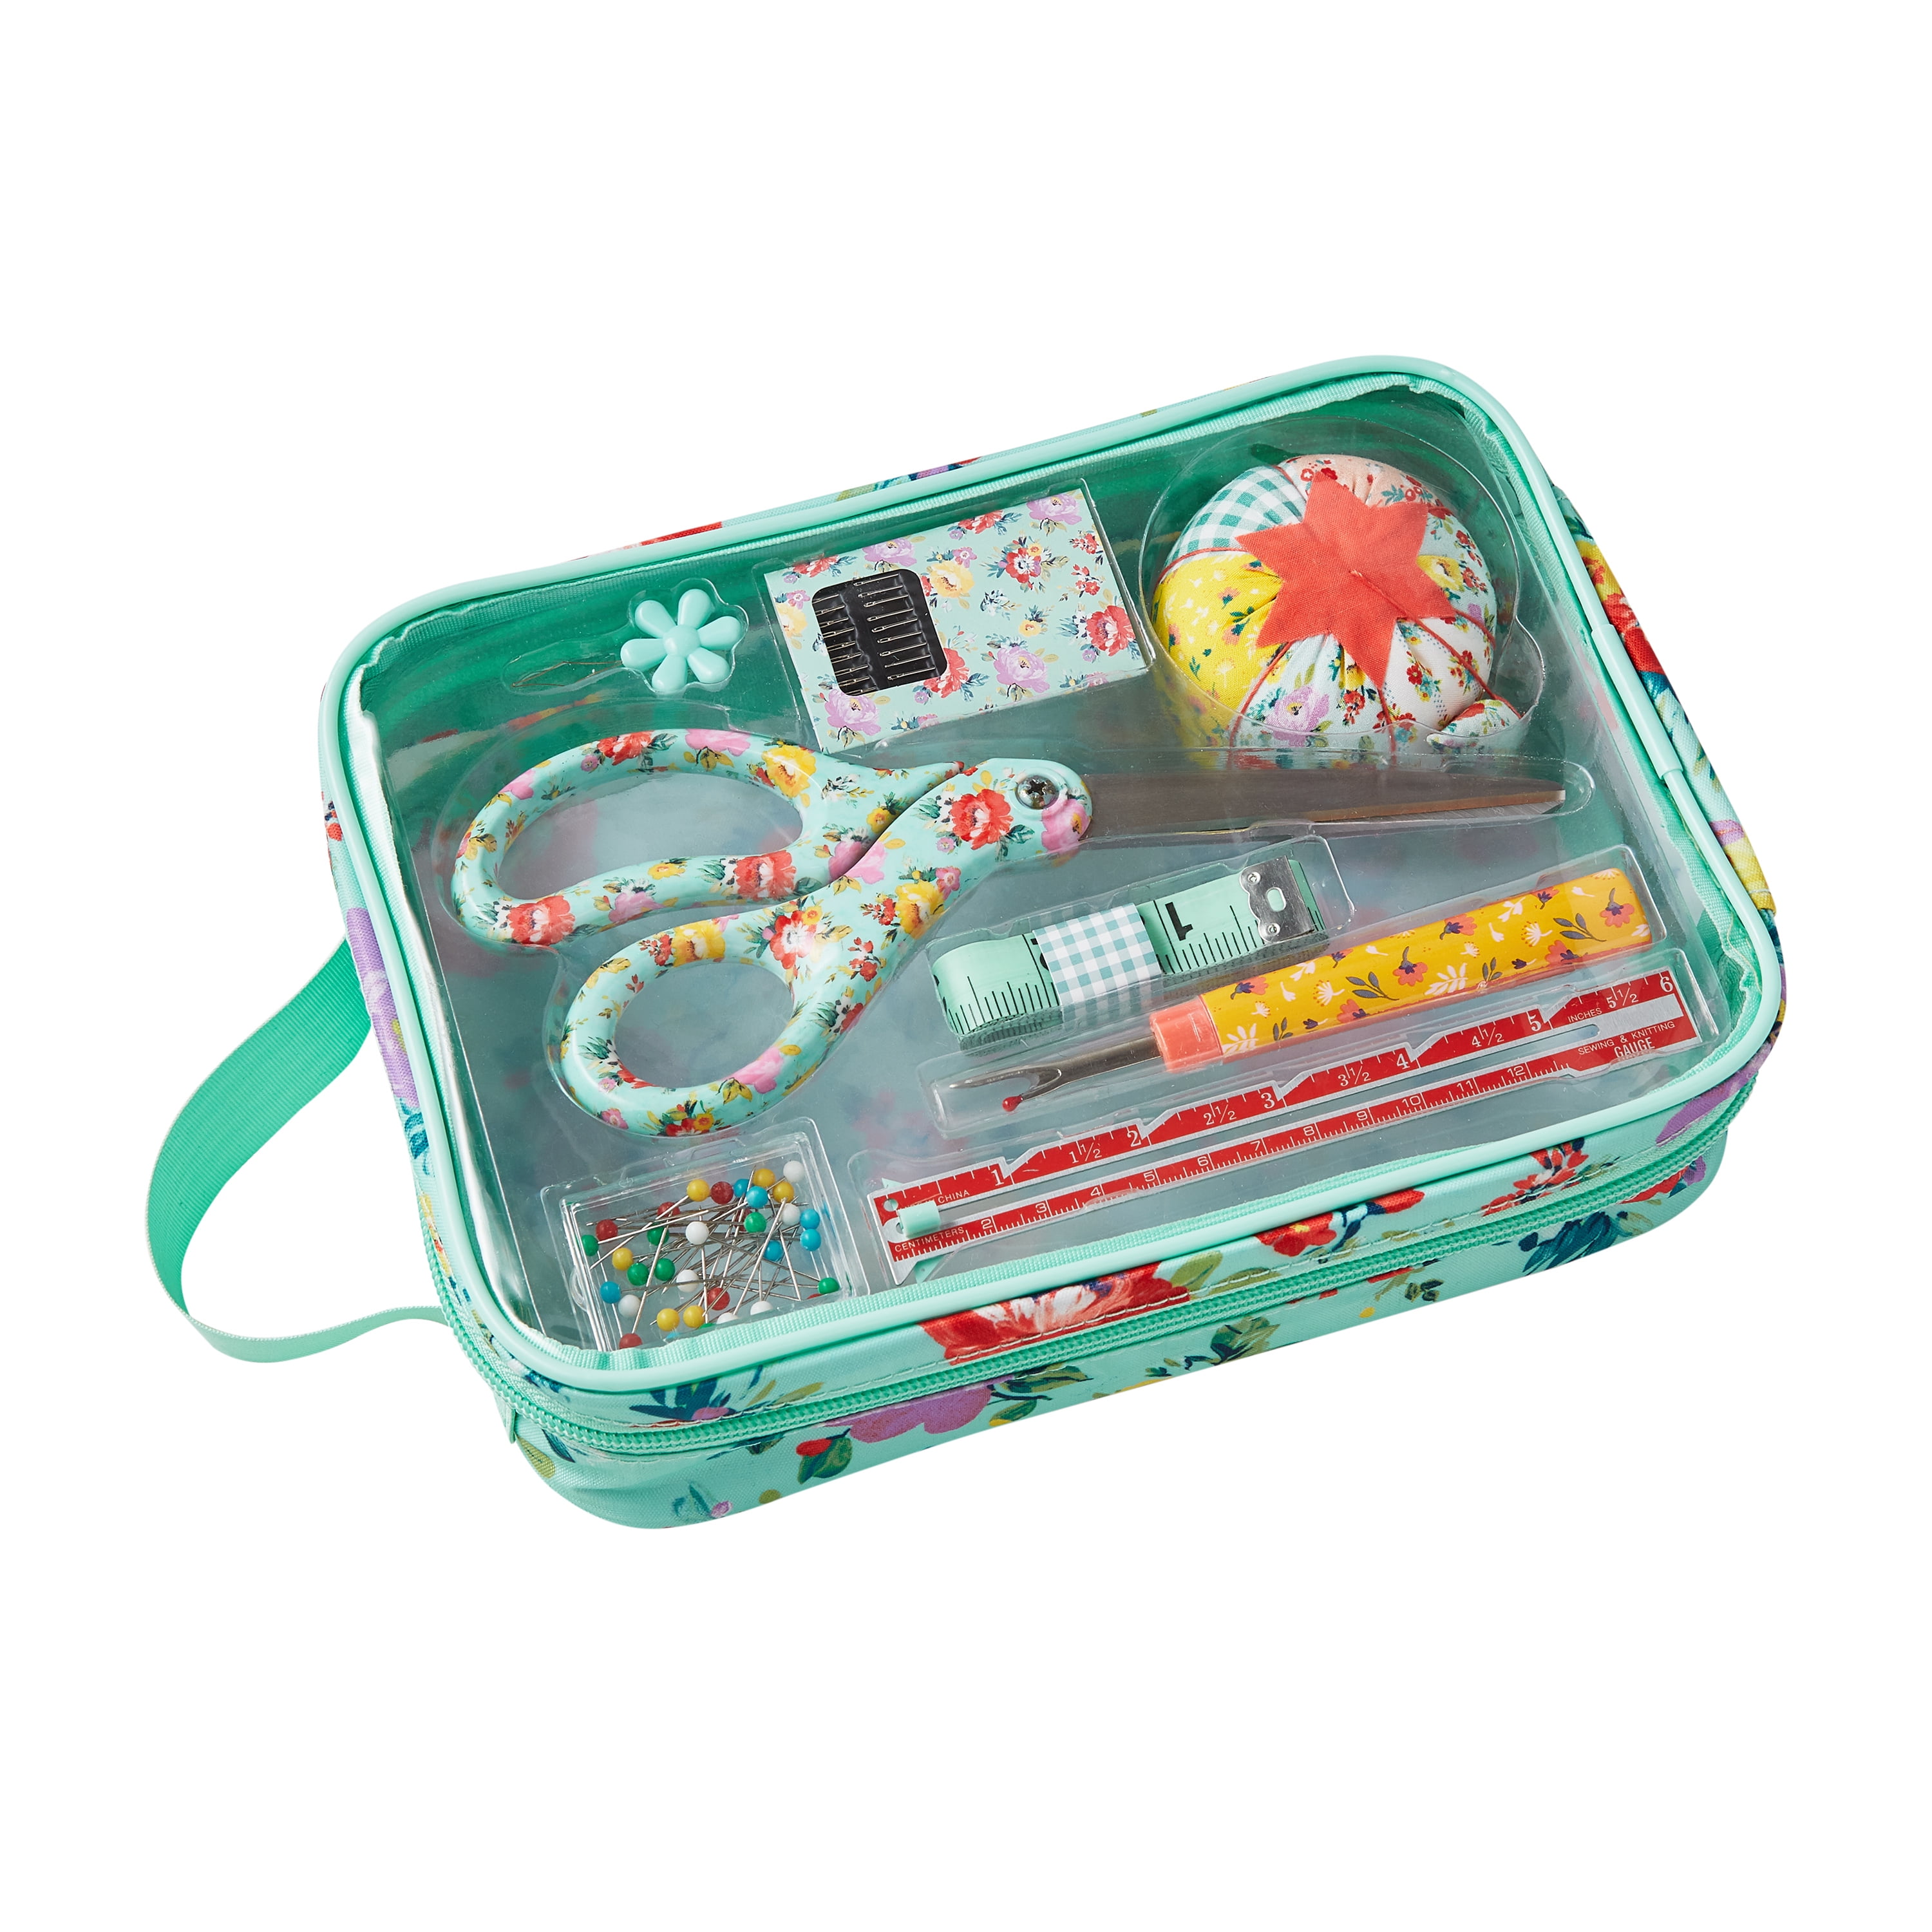 Singer Travel Sewing Kit in Case, Assorted Colors - 27 pc.